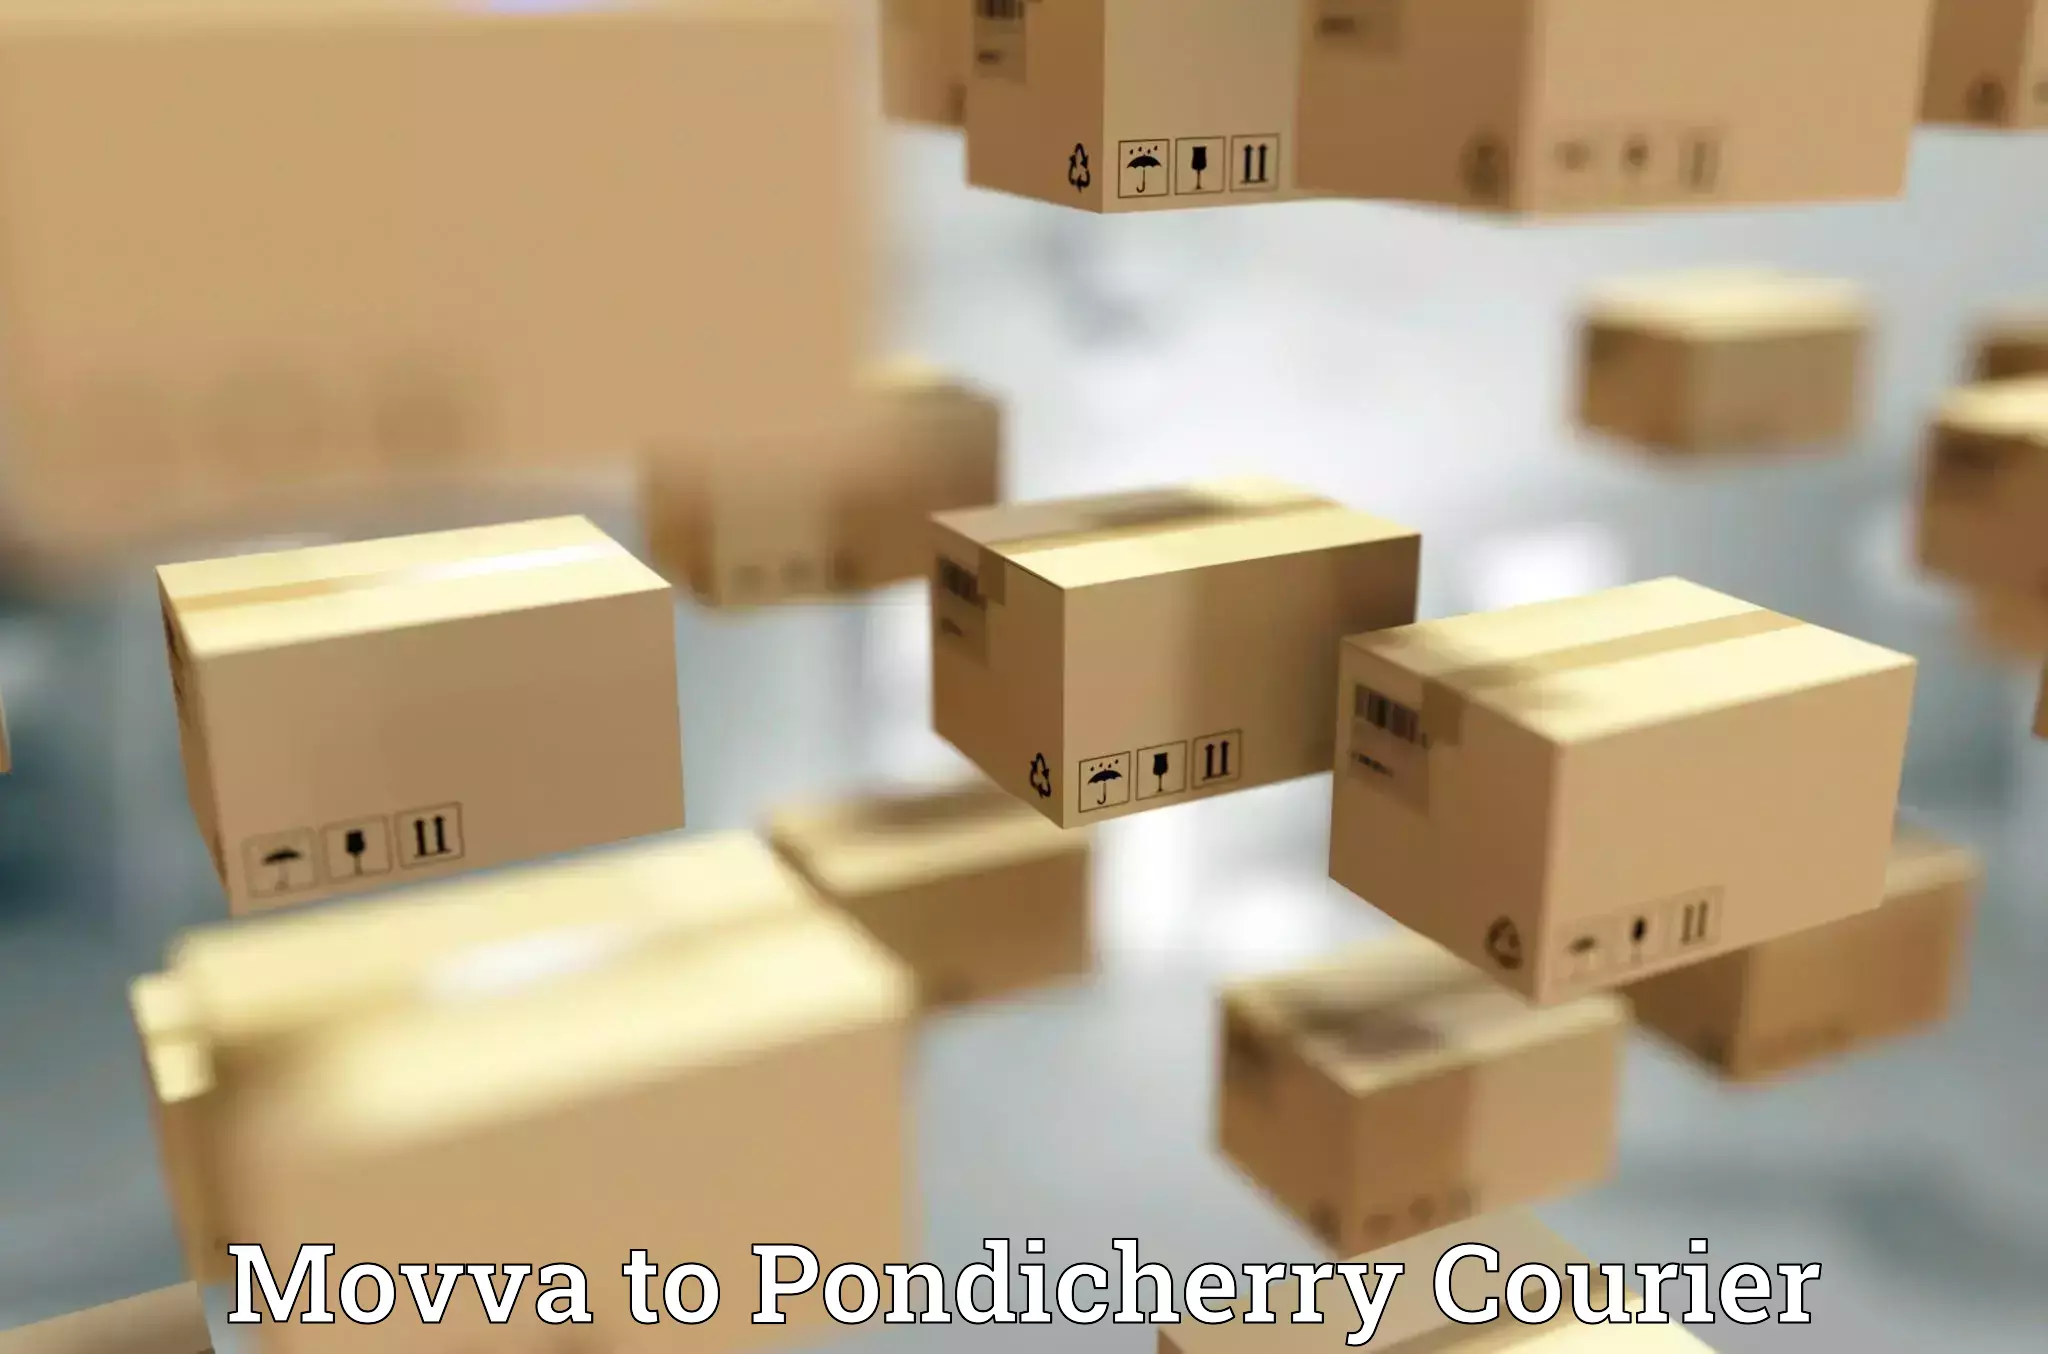 Courier service partnerships Movva to Pondicherry